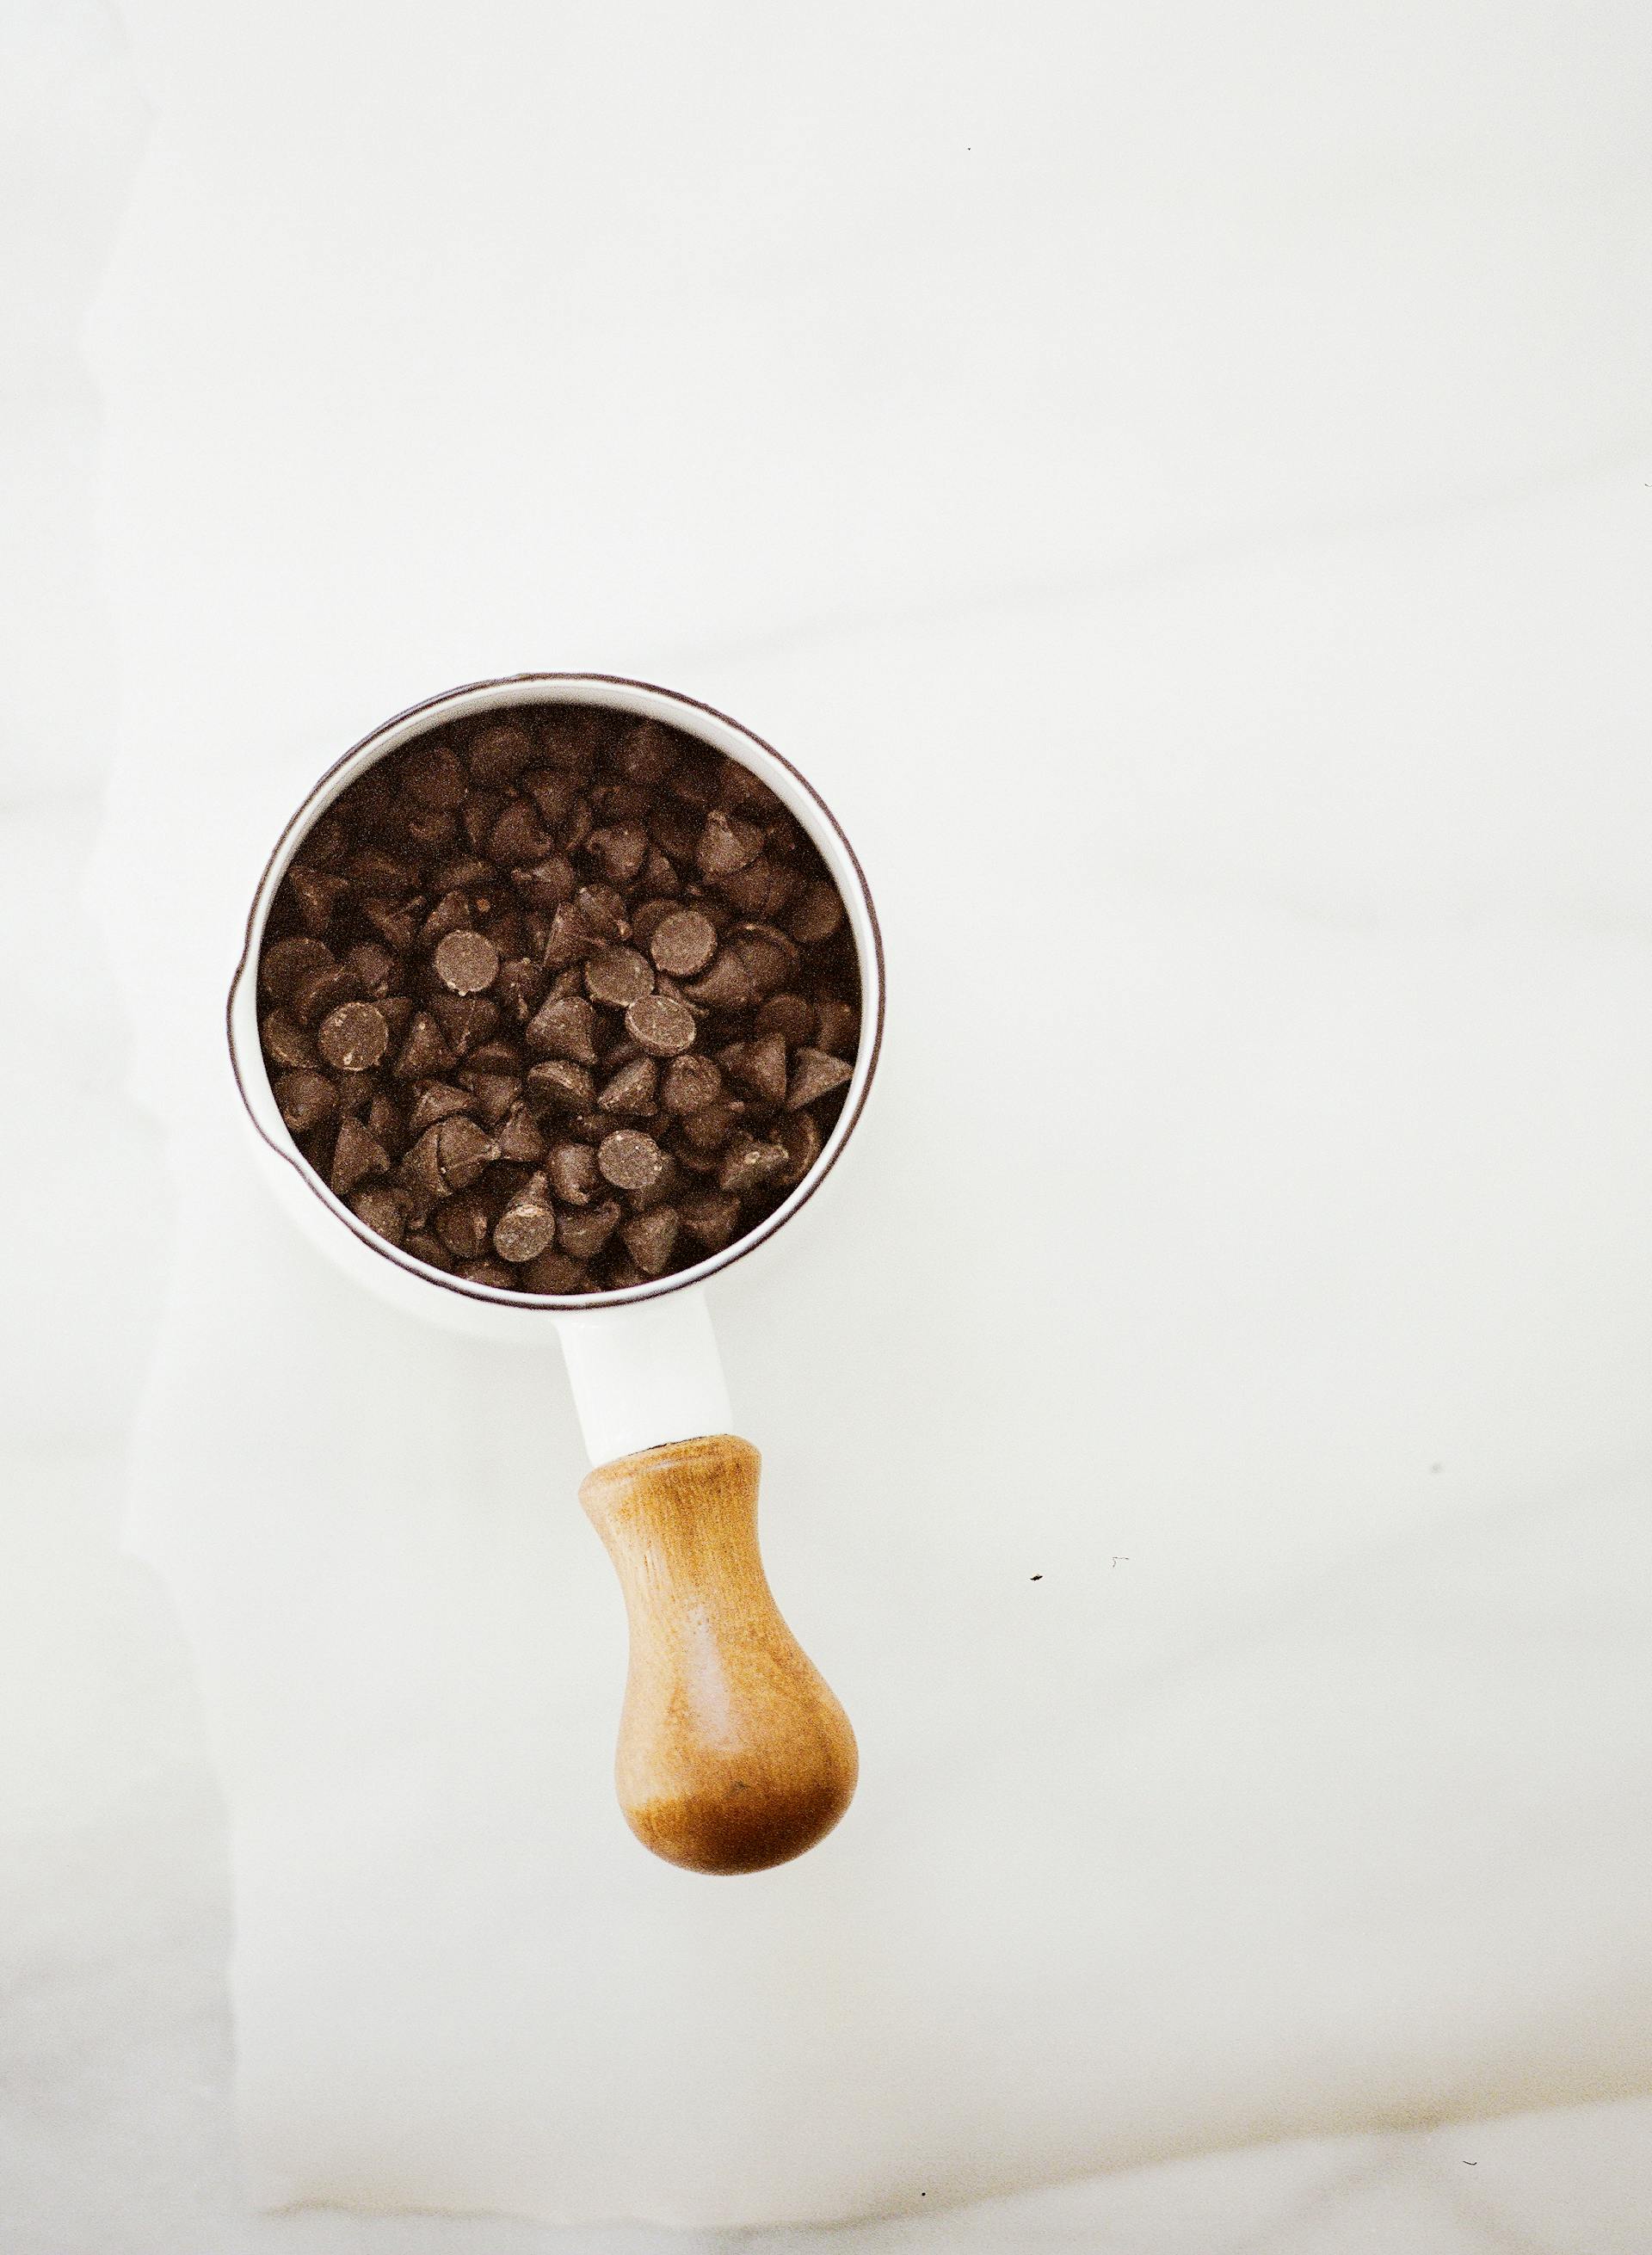 Chocolate chips in a container | Source: Pexels